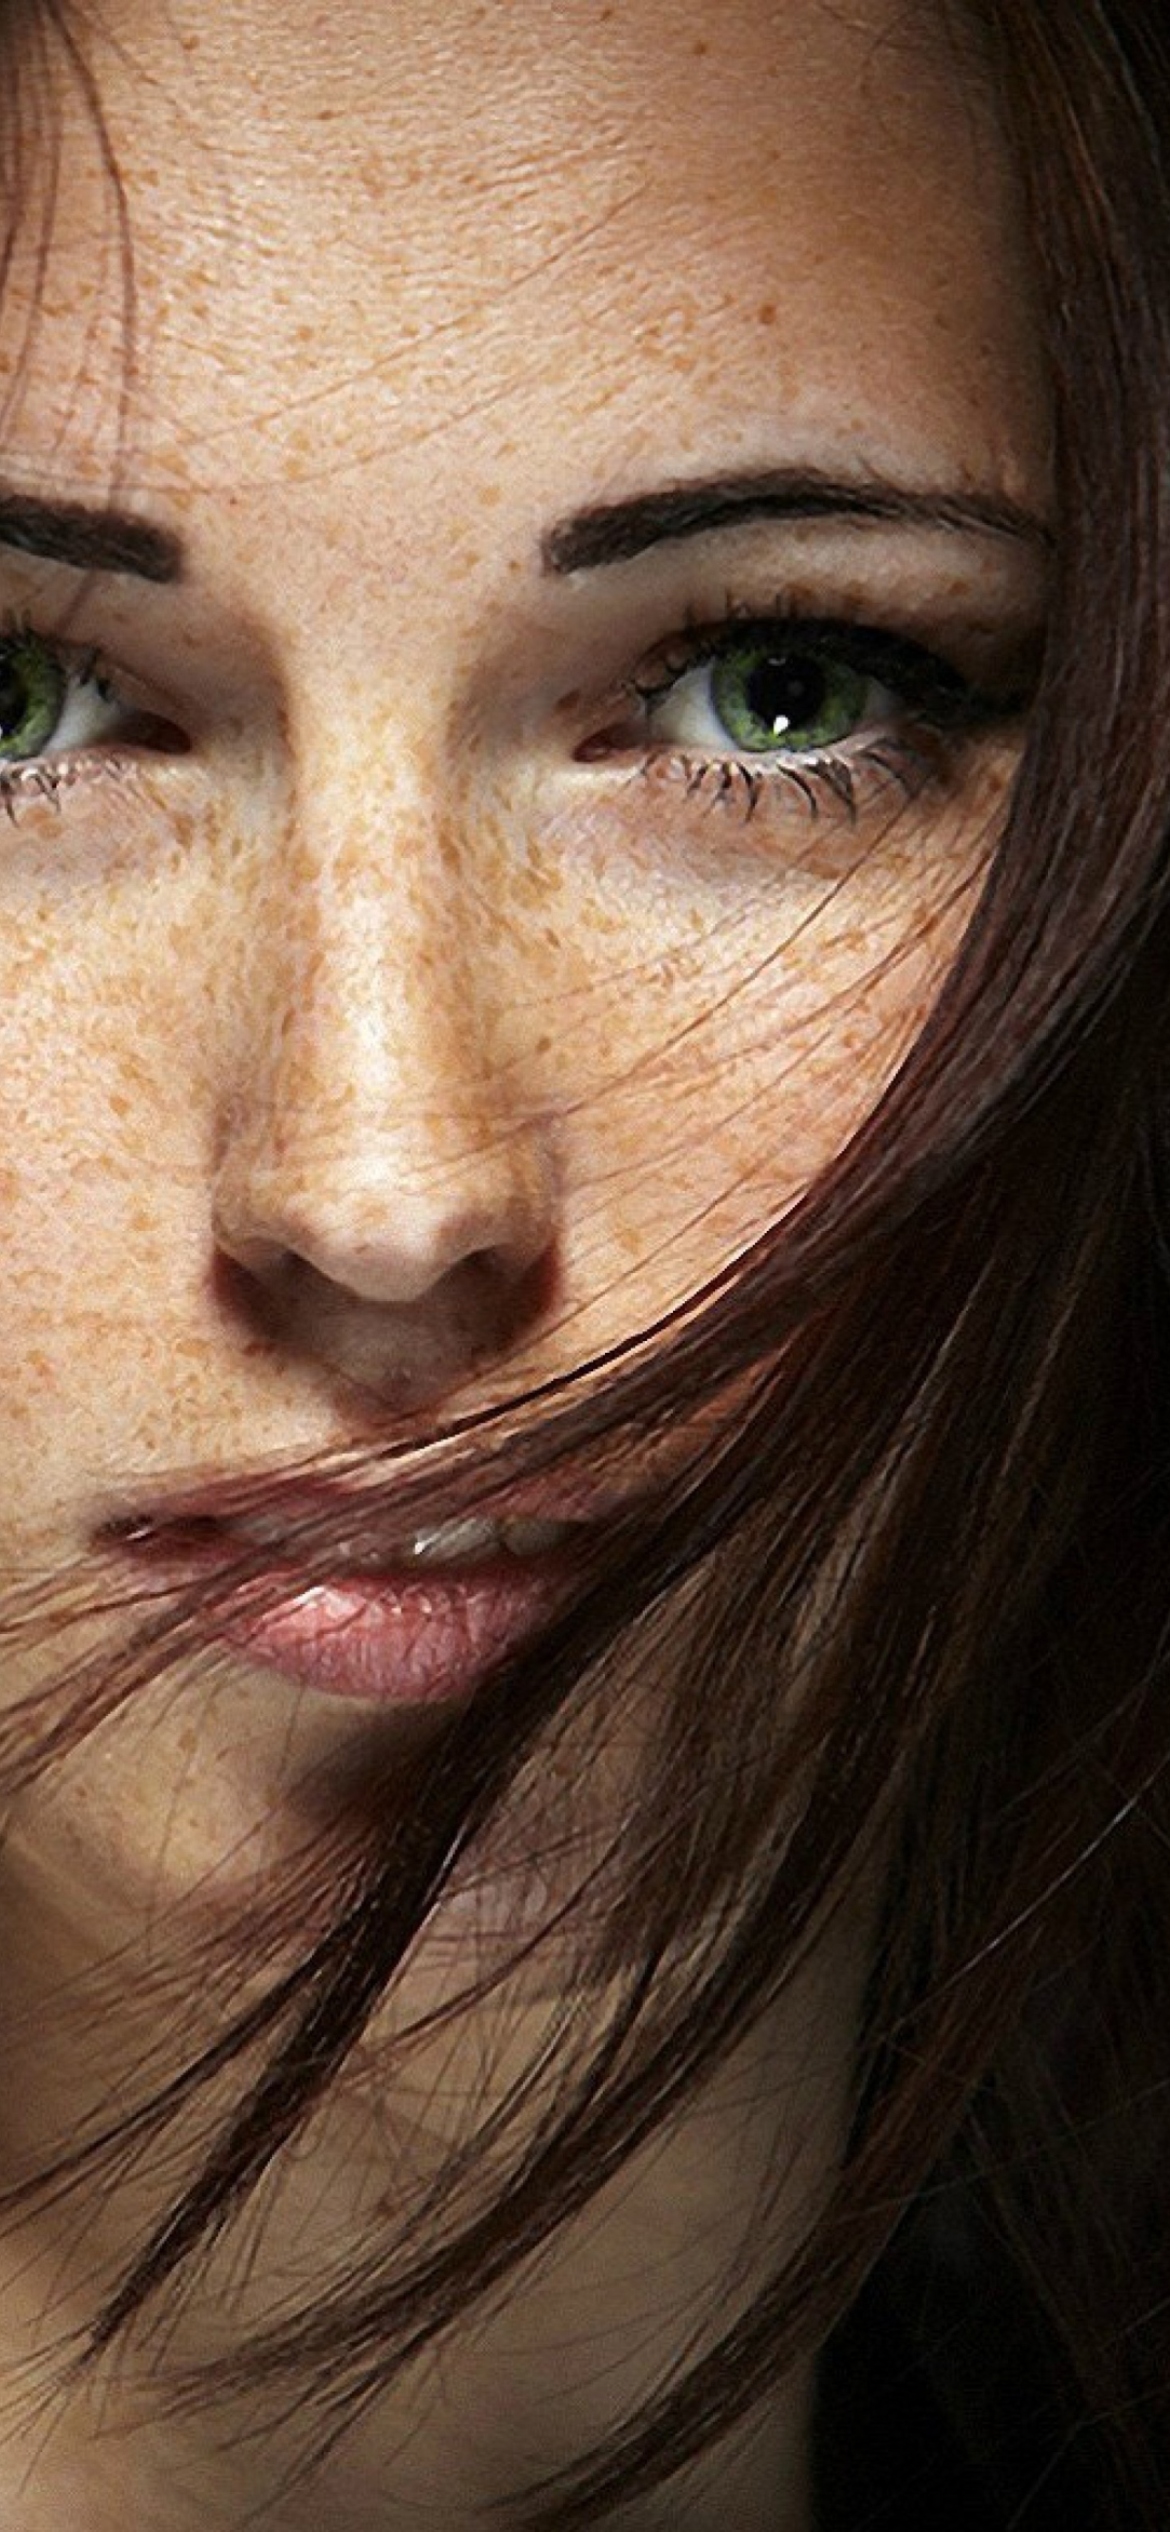 Brunette With Freckles screenshot #1 1170x2532